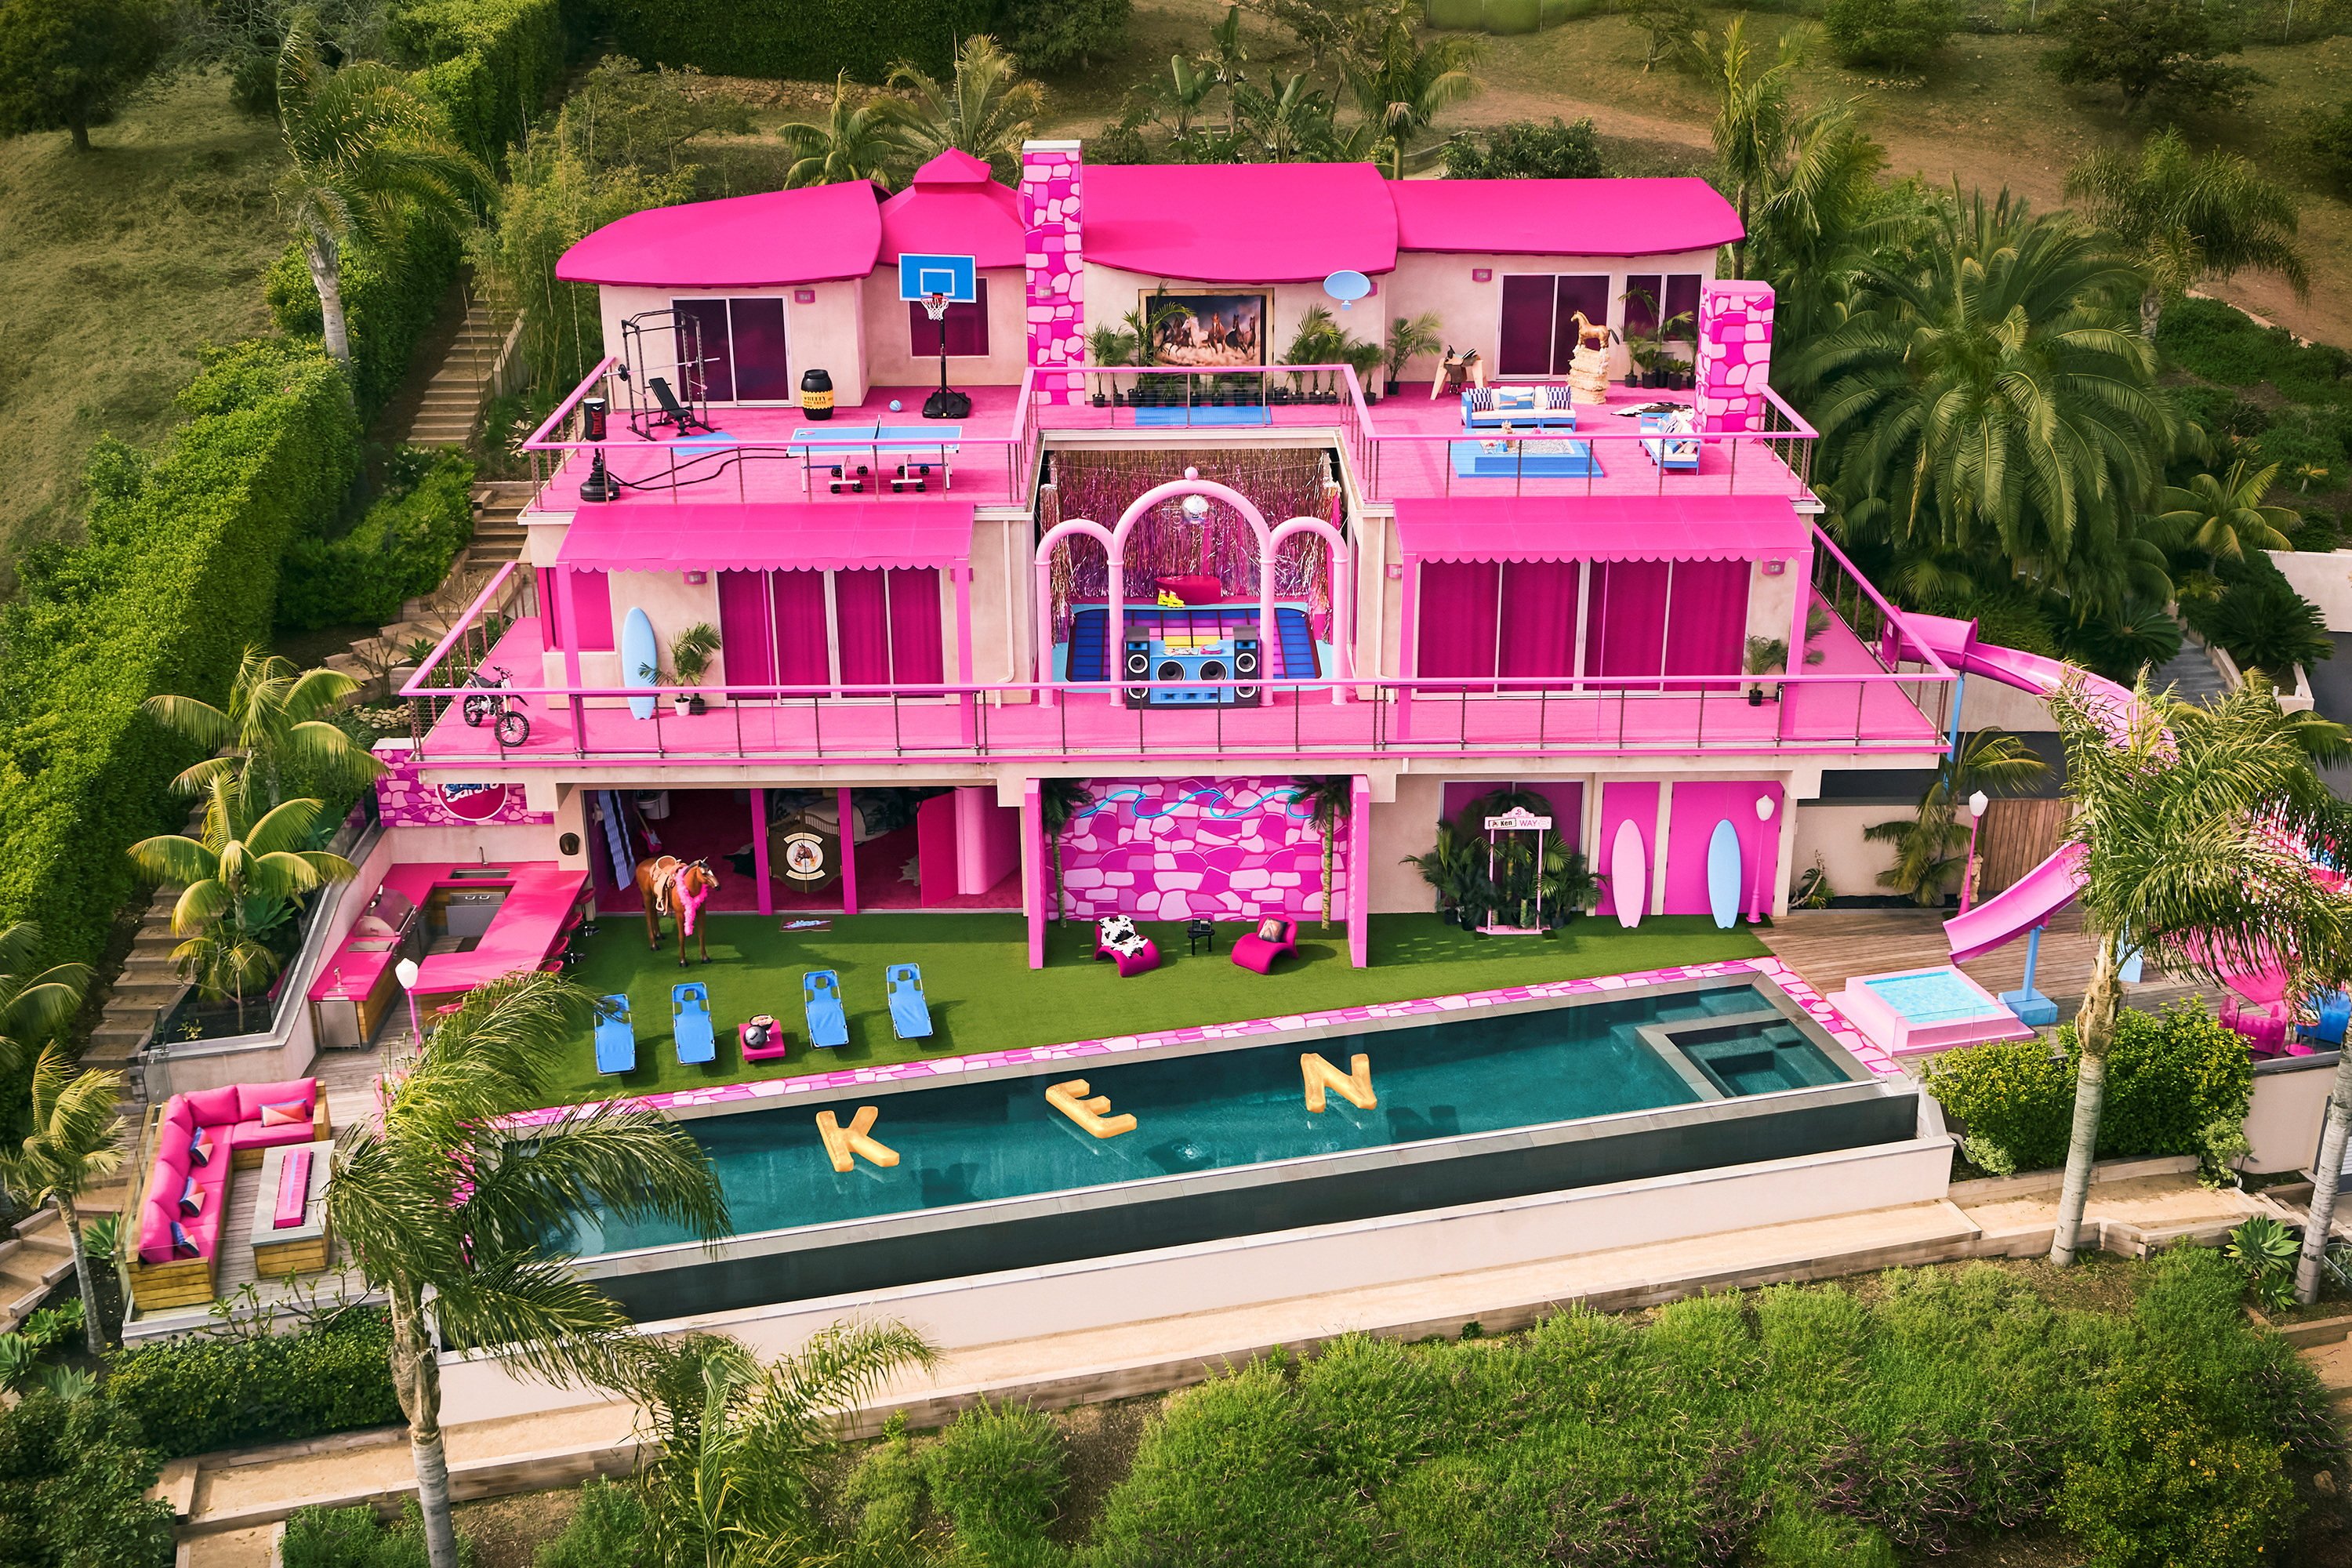 Barbie’s iconic Malibu Dreamhouse, which is making a return in real life with a three-storey lookalike mansion that mirrors the set of Warner Bros’ upcoming Barbie movie made available for booking again via vacation rental firm Airbnb. Photo: Handout